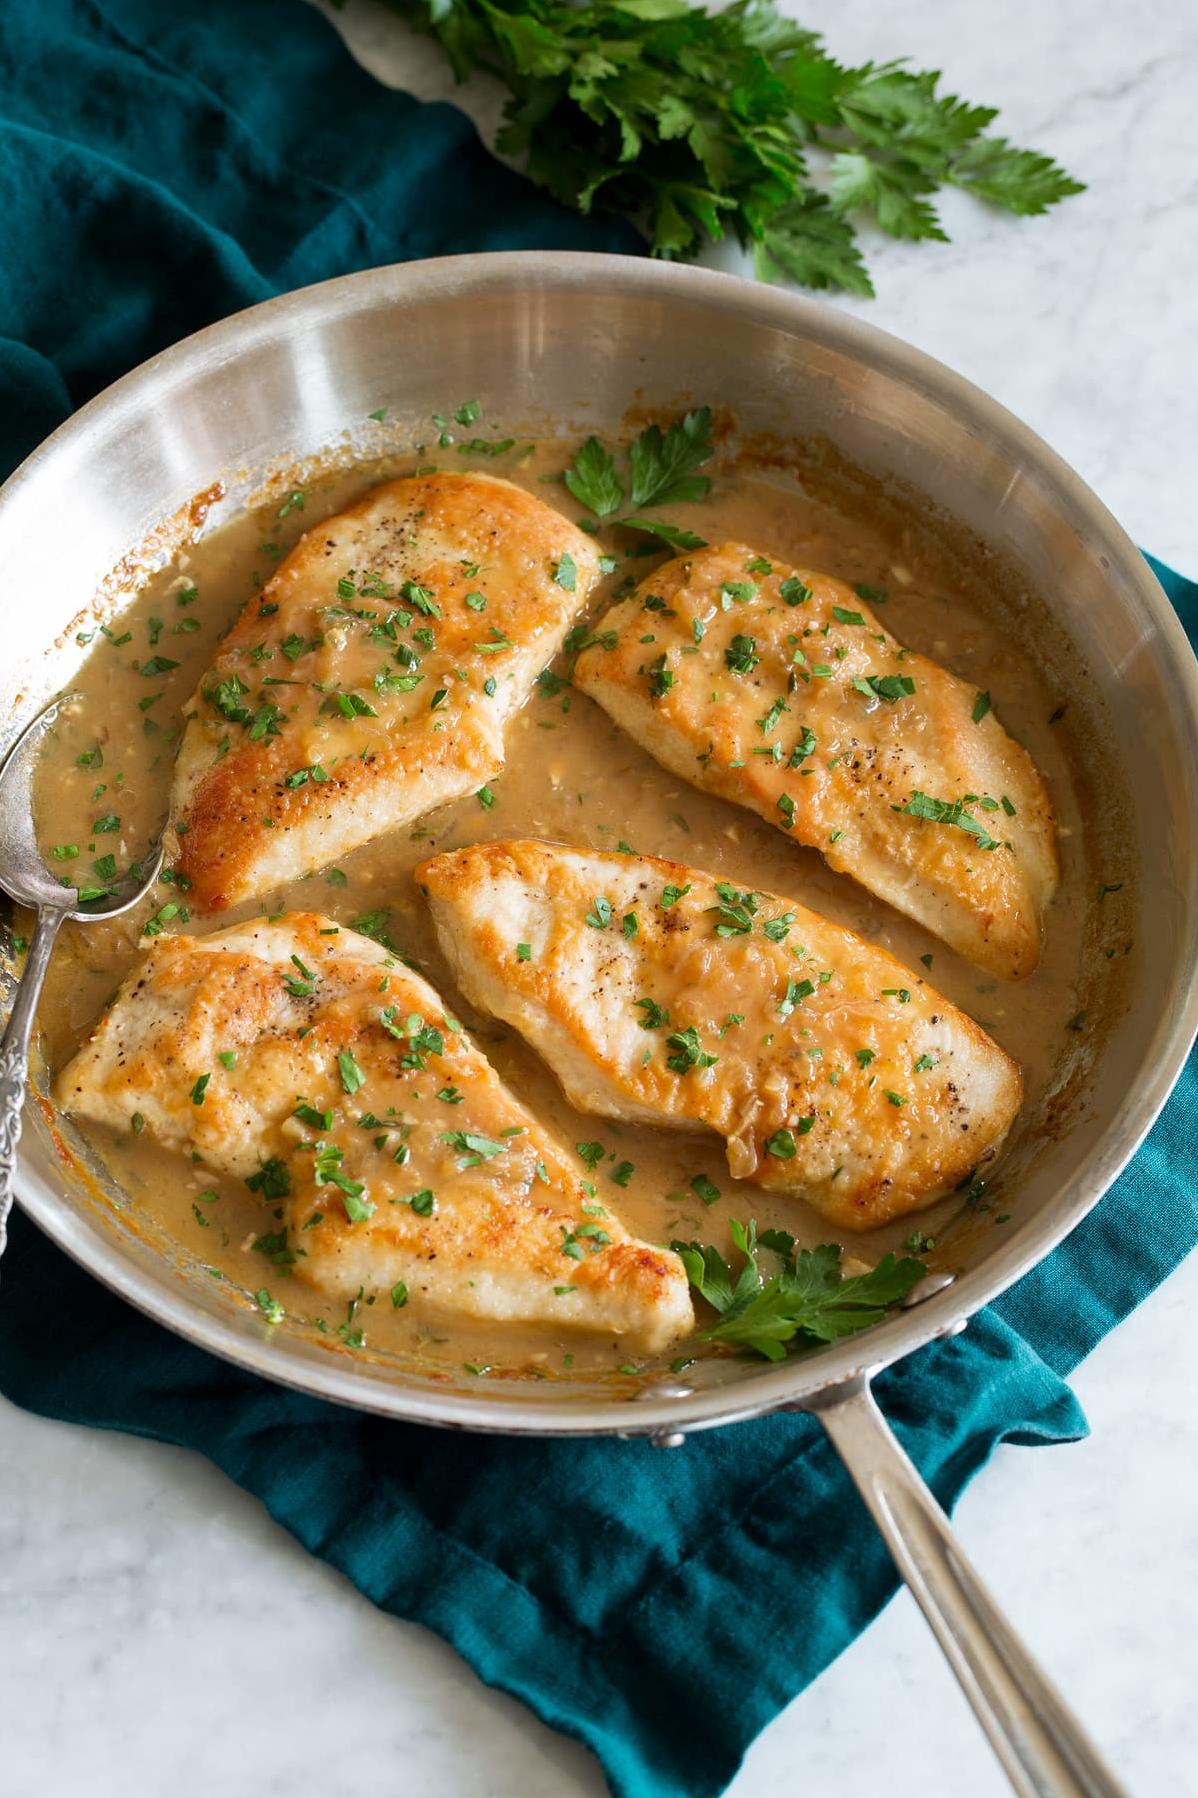  Juicy chicken smothered in a flavorful white wine sauce